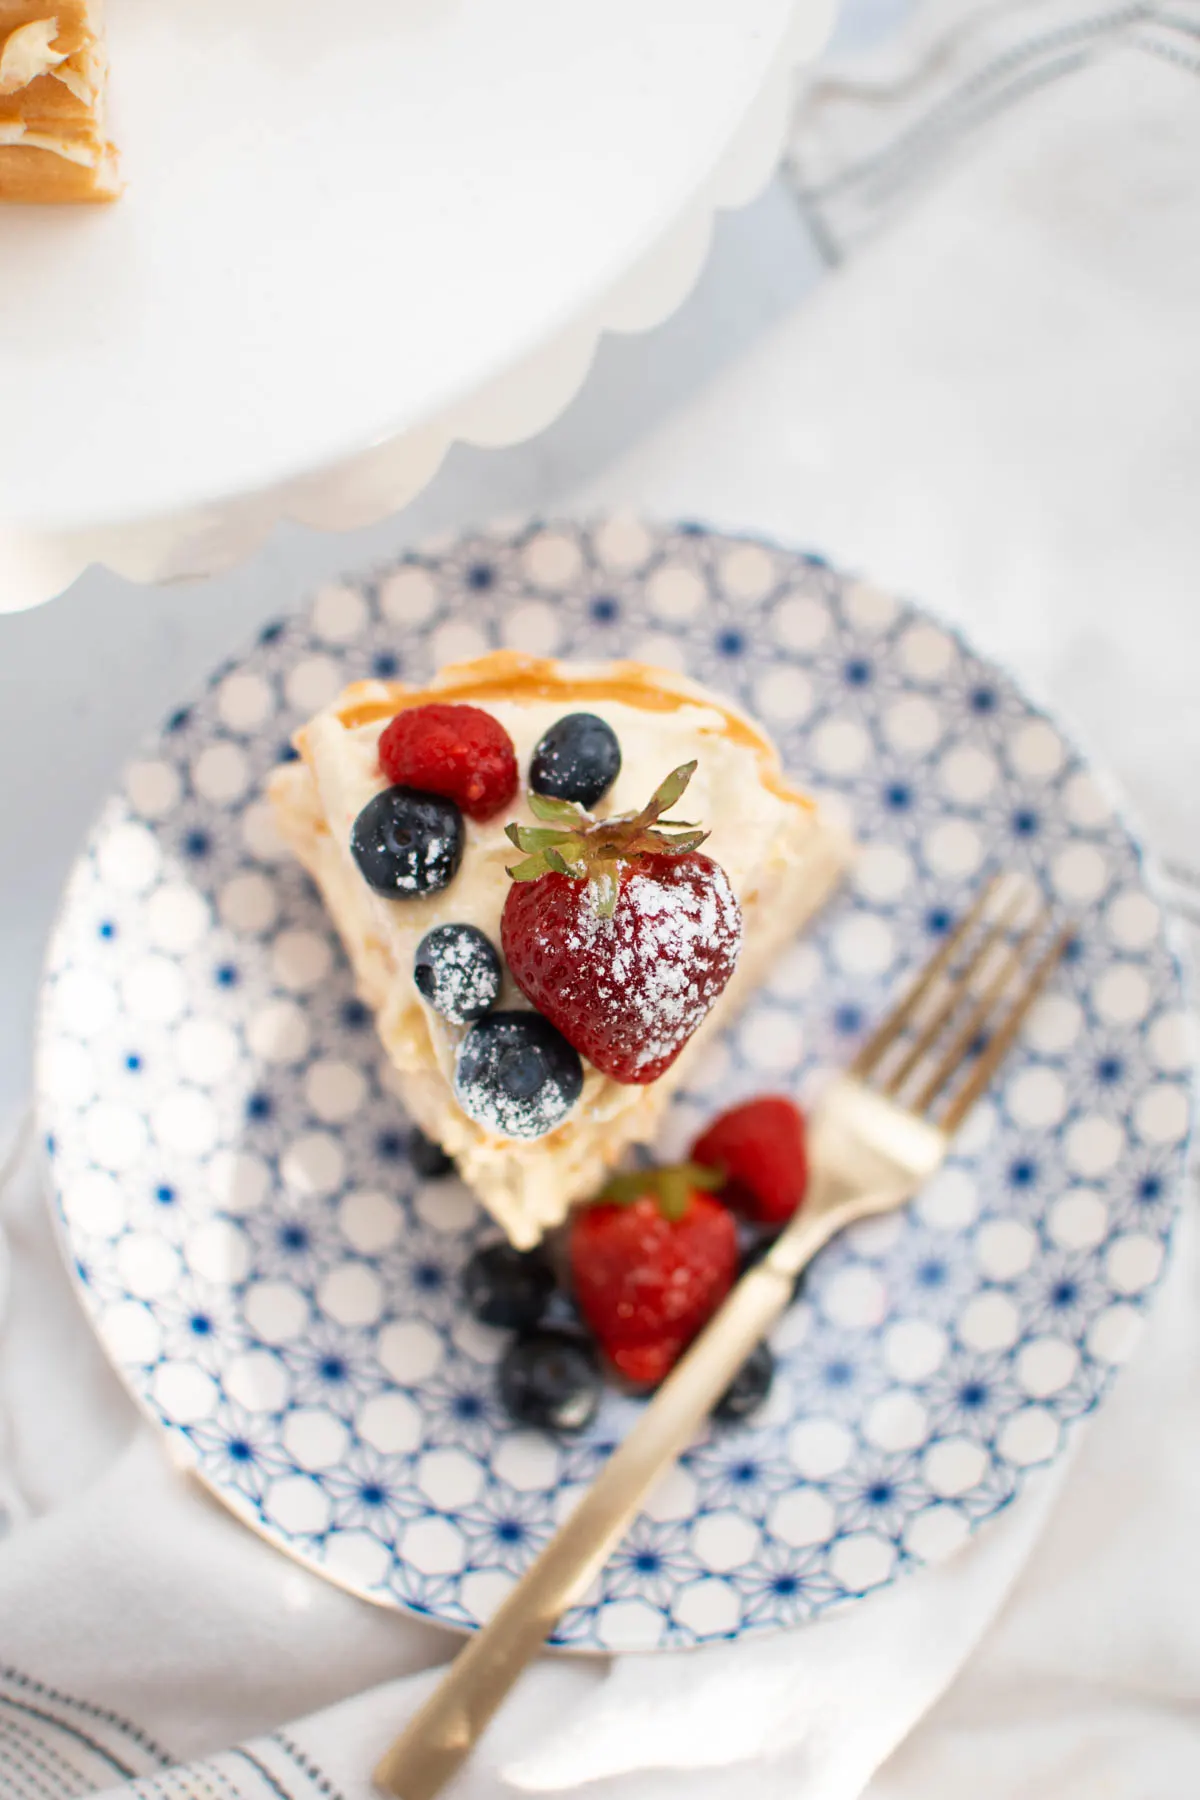 Slice of waffle cake with fresh berries on blue and white plate.